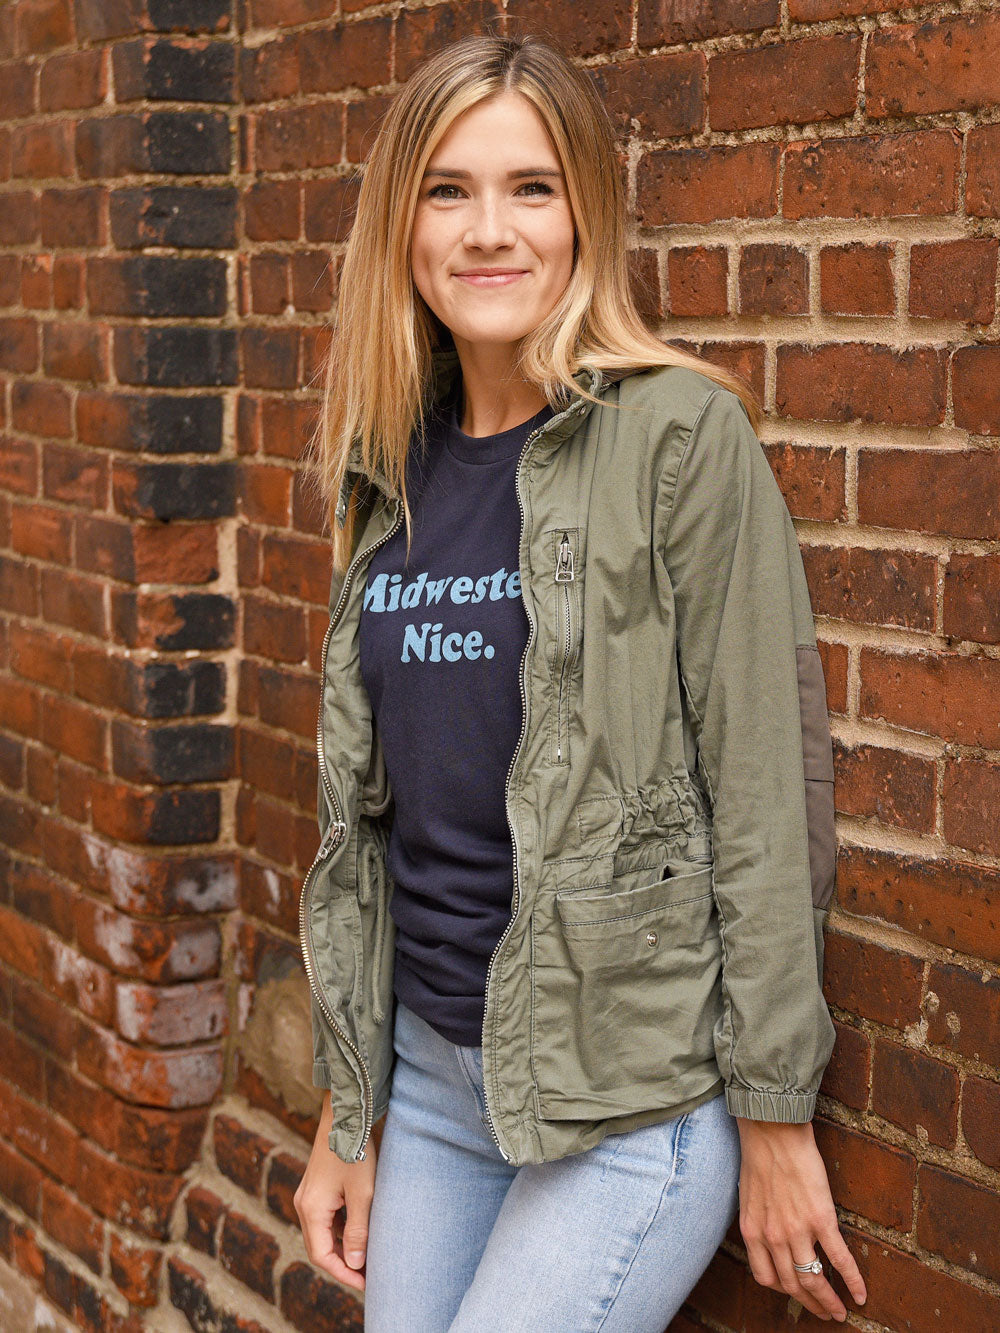 Midwestern Nice navy t-shirt on model by brick wall